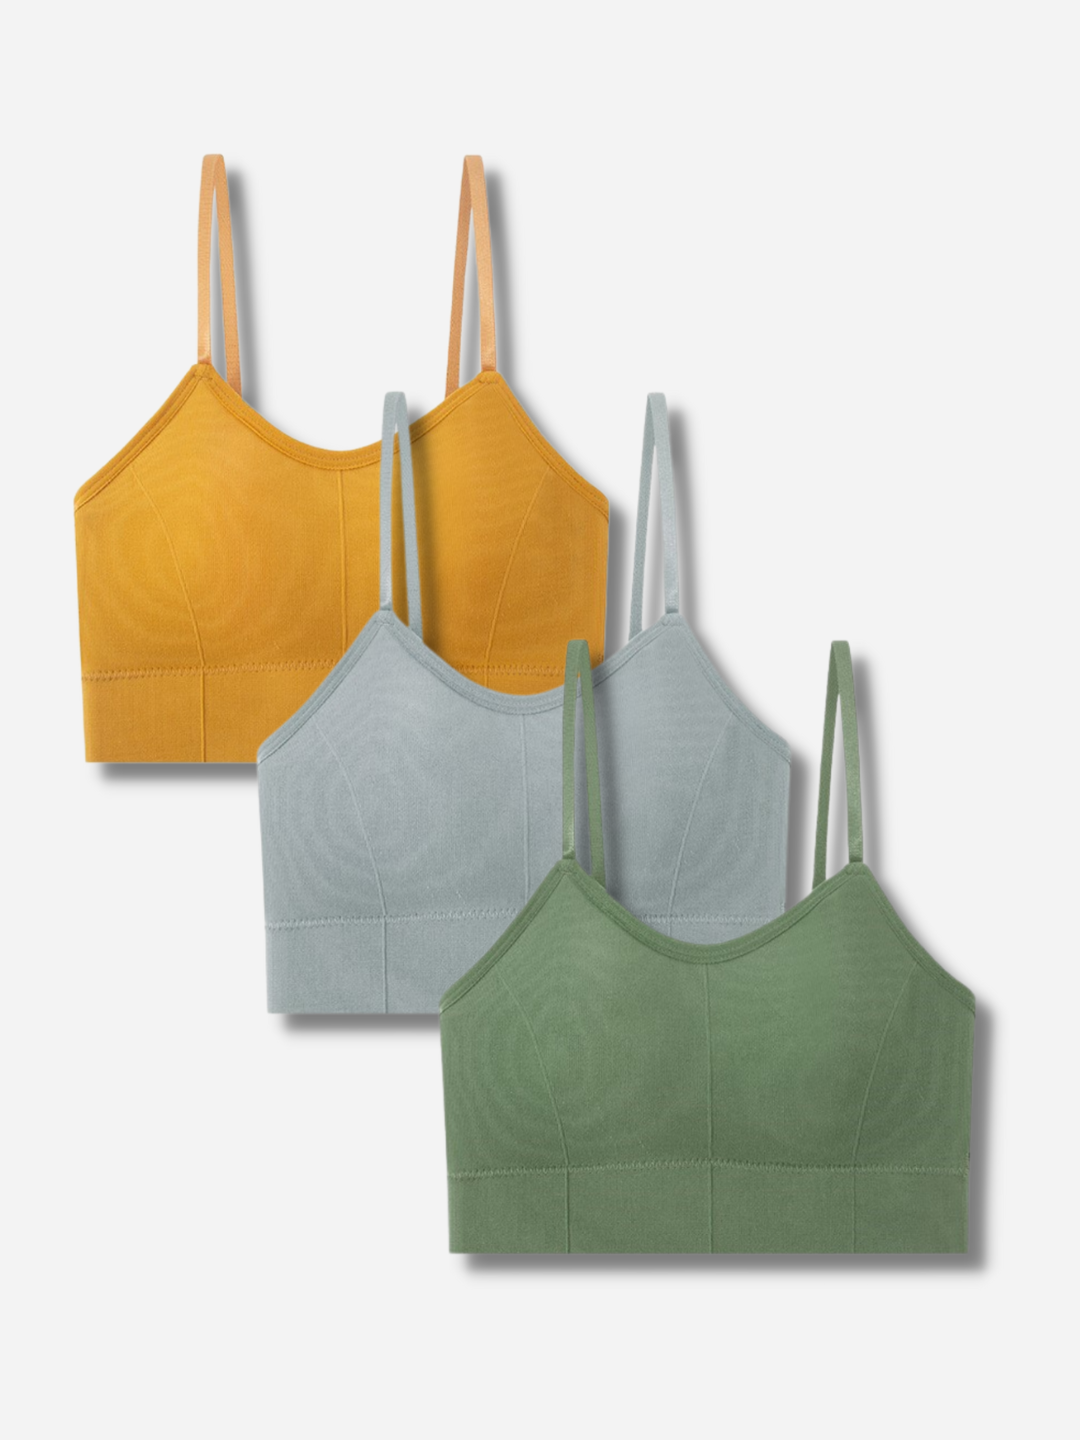 Pack Of 3 Women's Cami Crop Top Bralettes Sports Bra,Yellow, Gray, Green